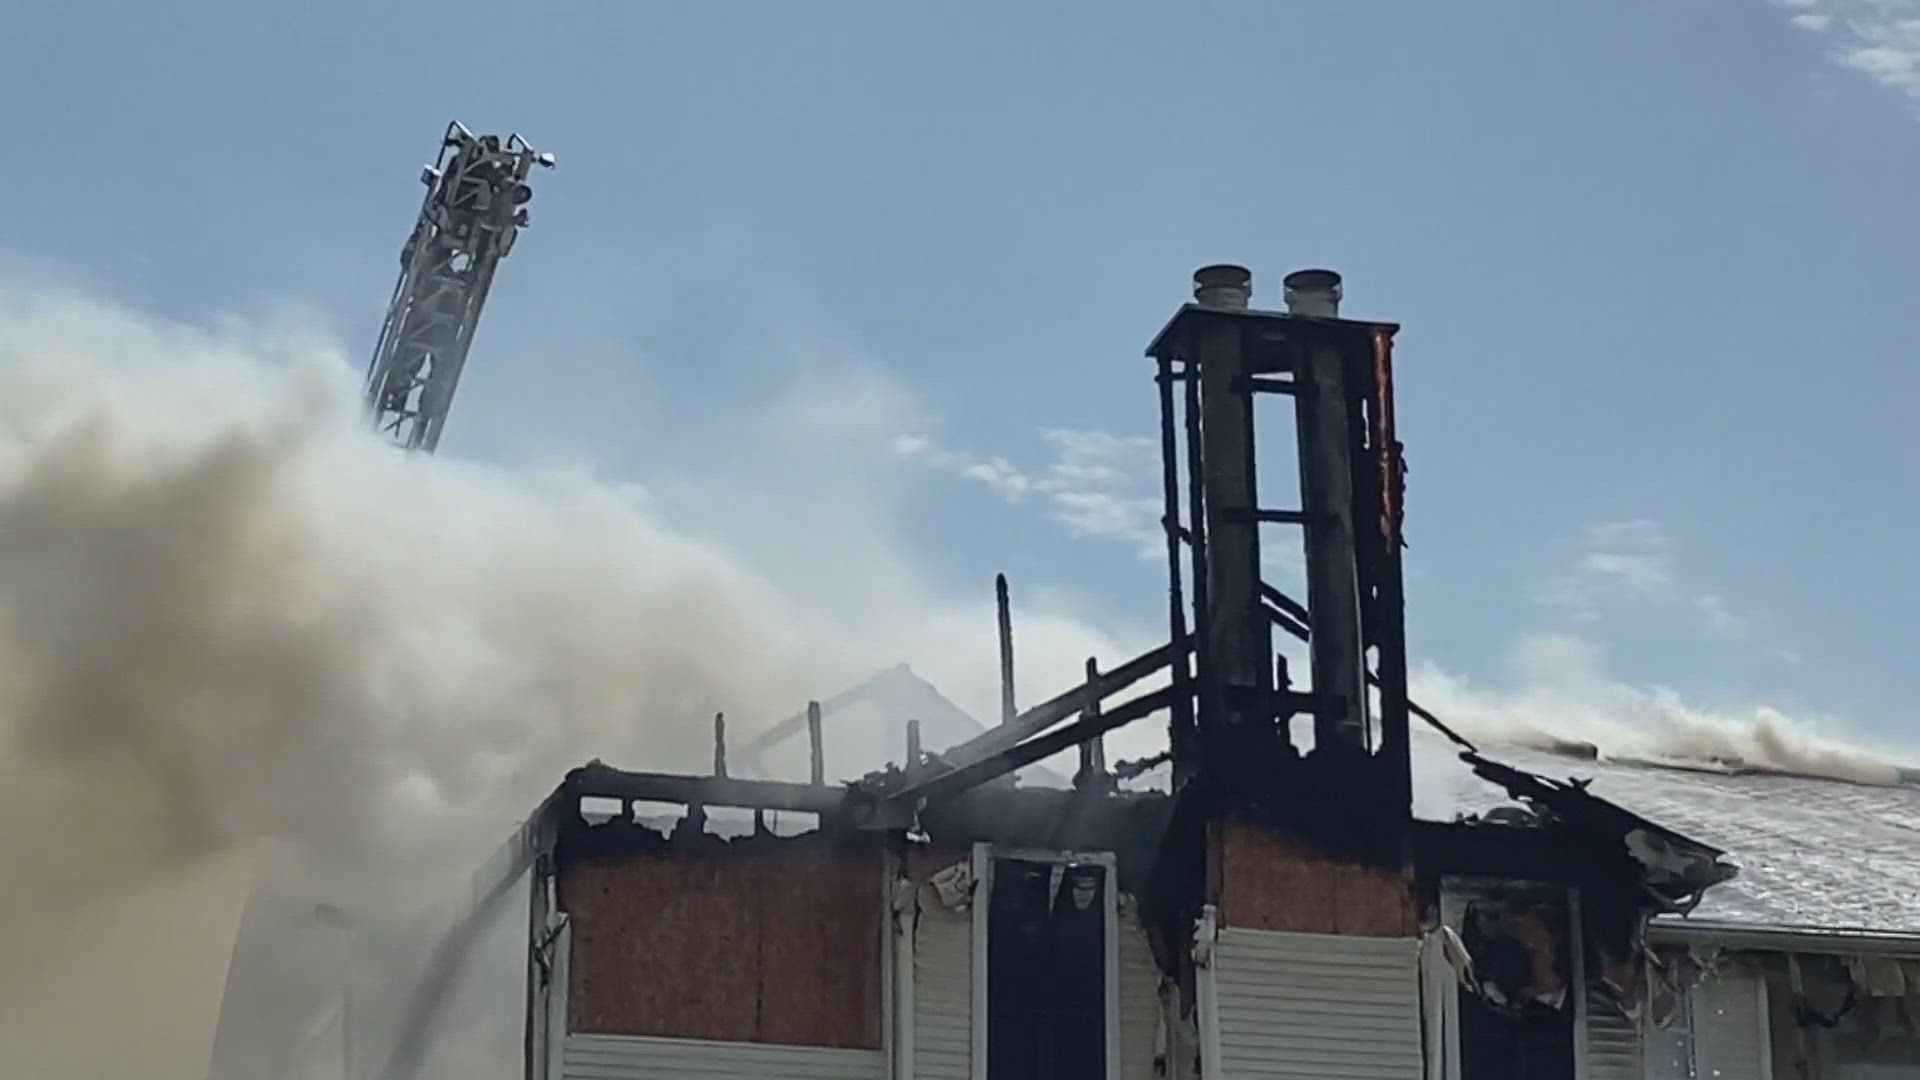 Firefighters are responding to a large fire in O'Fallon, Missouri. The fire broke out sometime before 11 a.m. Tuesday at the Enclave at Winghaven Apartments.